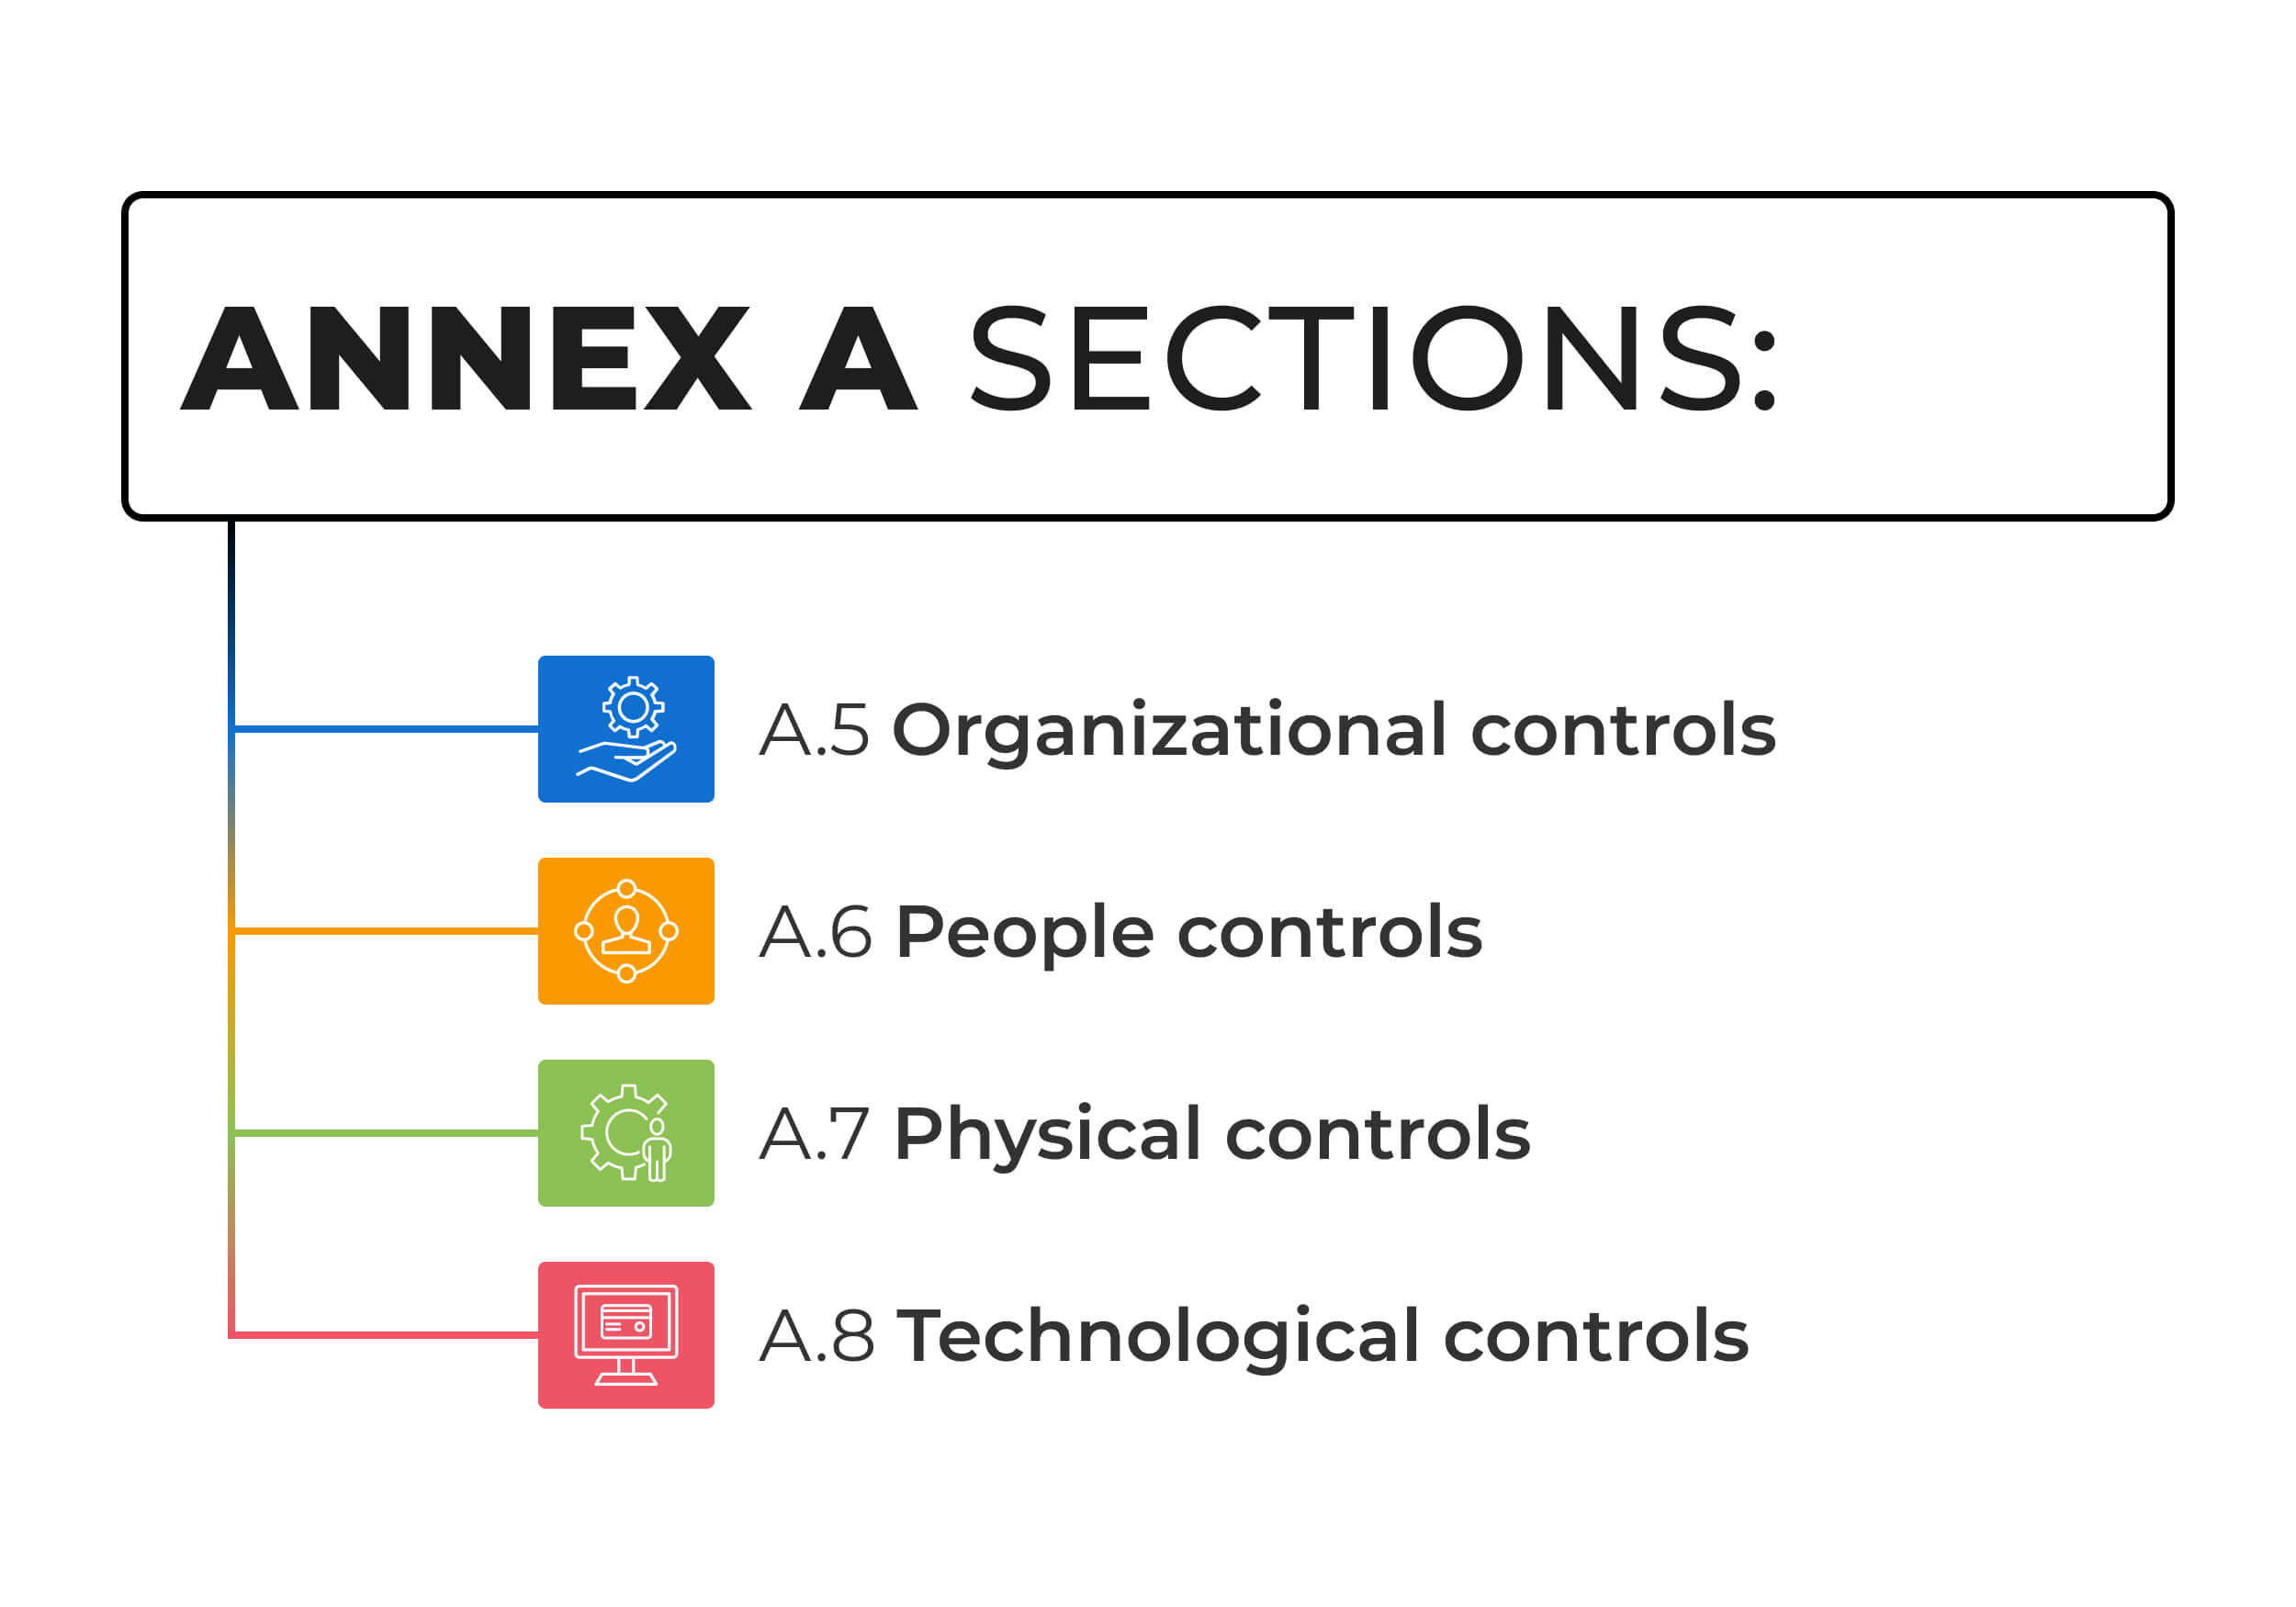 ISO 27001 controls | What are the security controls in Annex A?